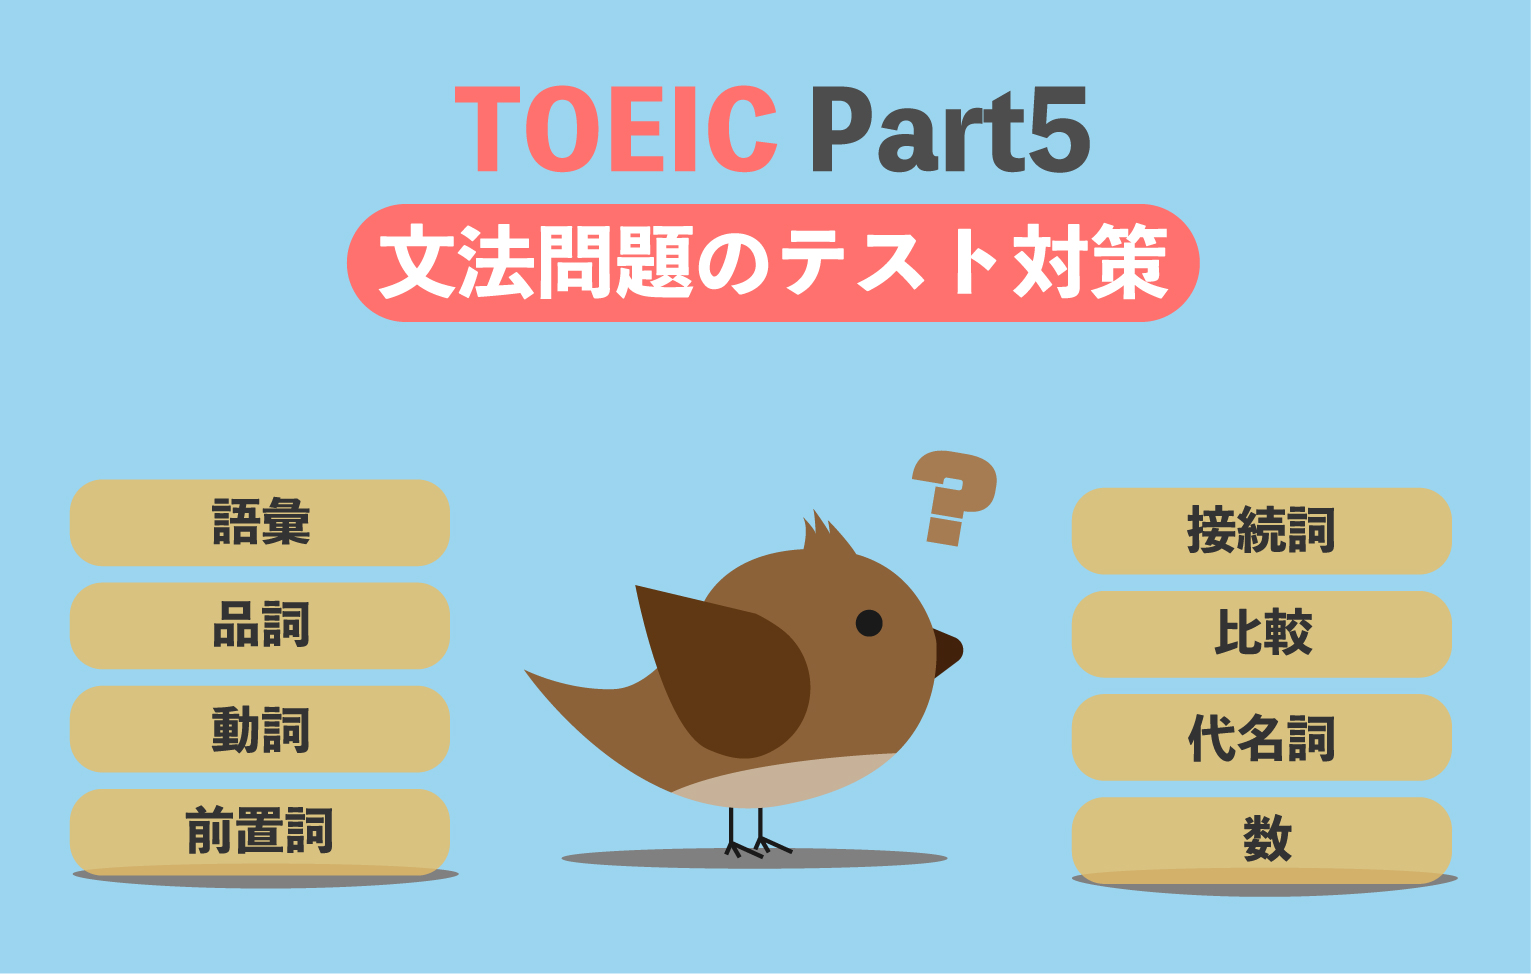 TOEIC Part5 文法問題の対策と勉強法【Part5をスムーズに回答する方法を紹介します】